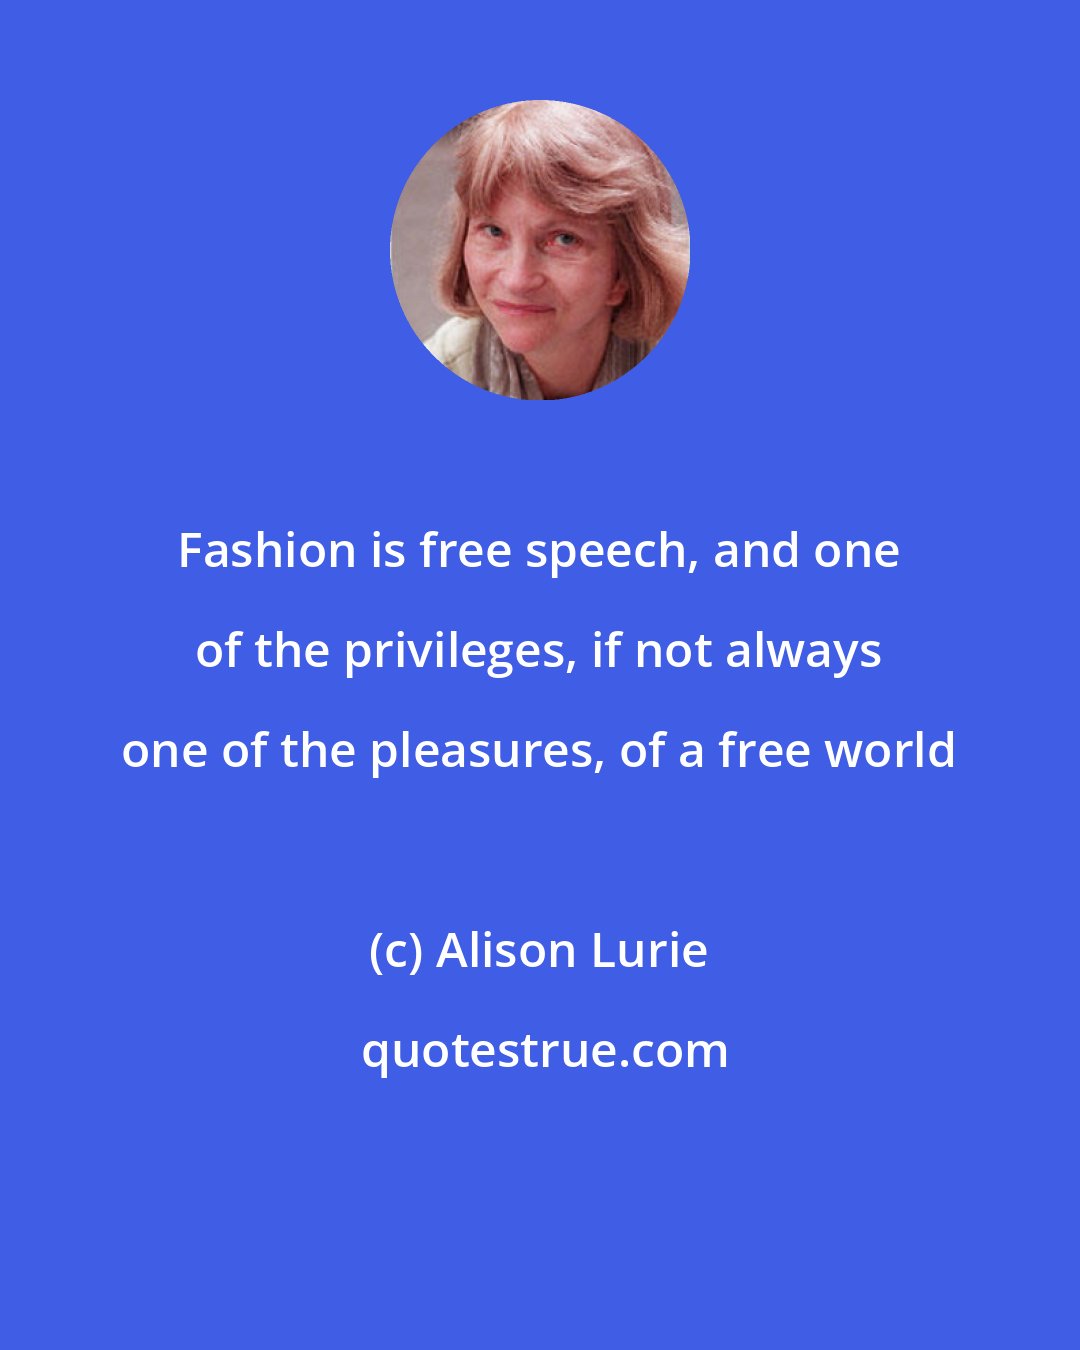 Alison Lurie: Fashion is free speech, and one of the privileges, if not always one of the pleasures, of a free world